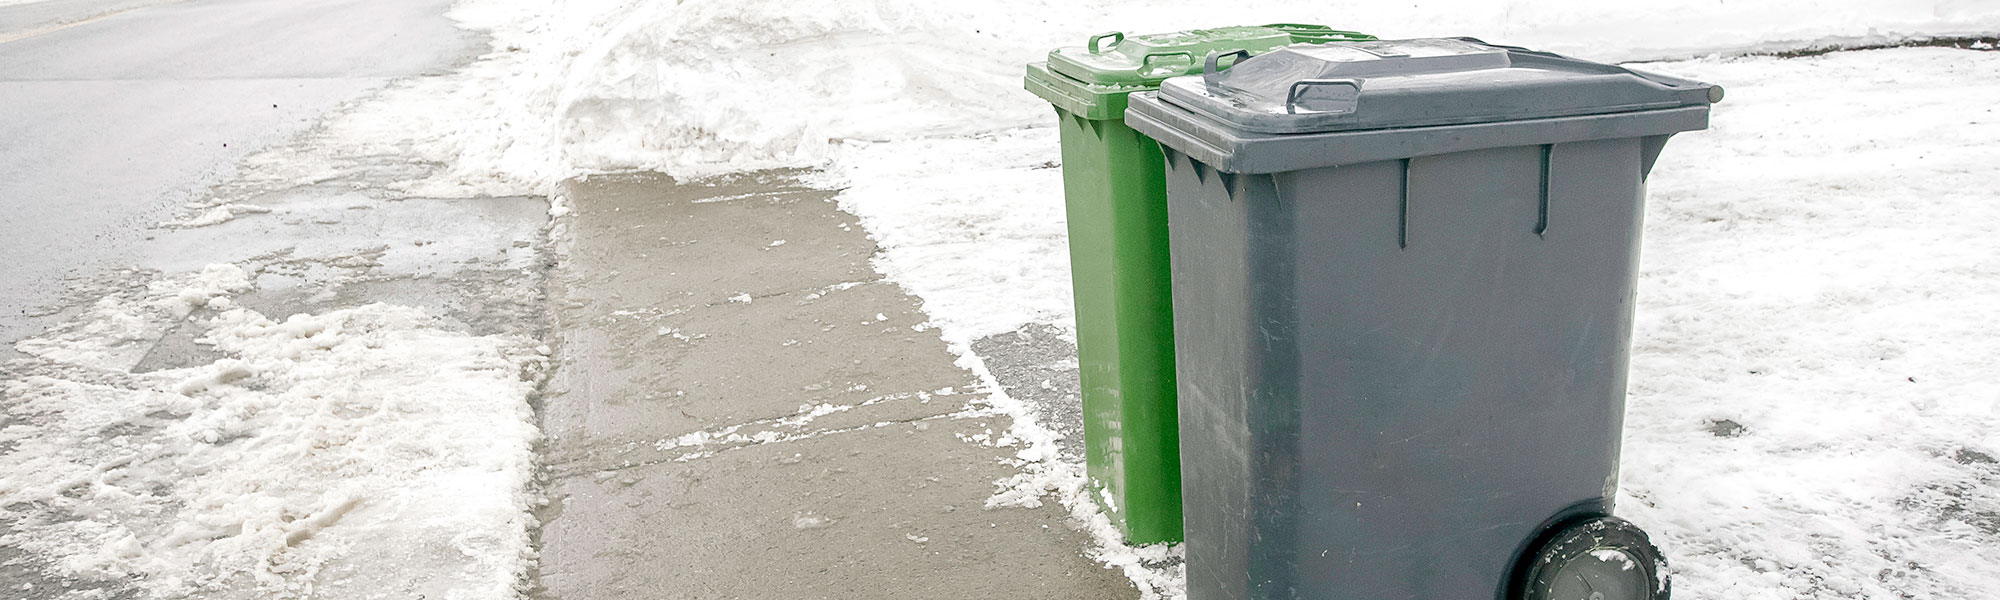 Garbage cans in snow